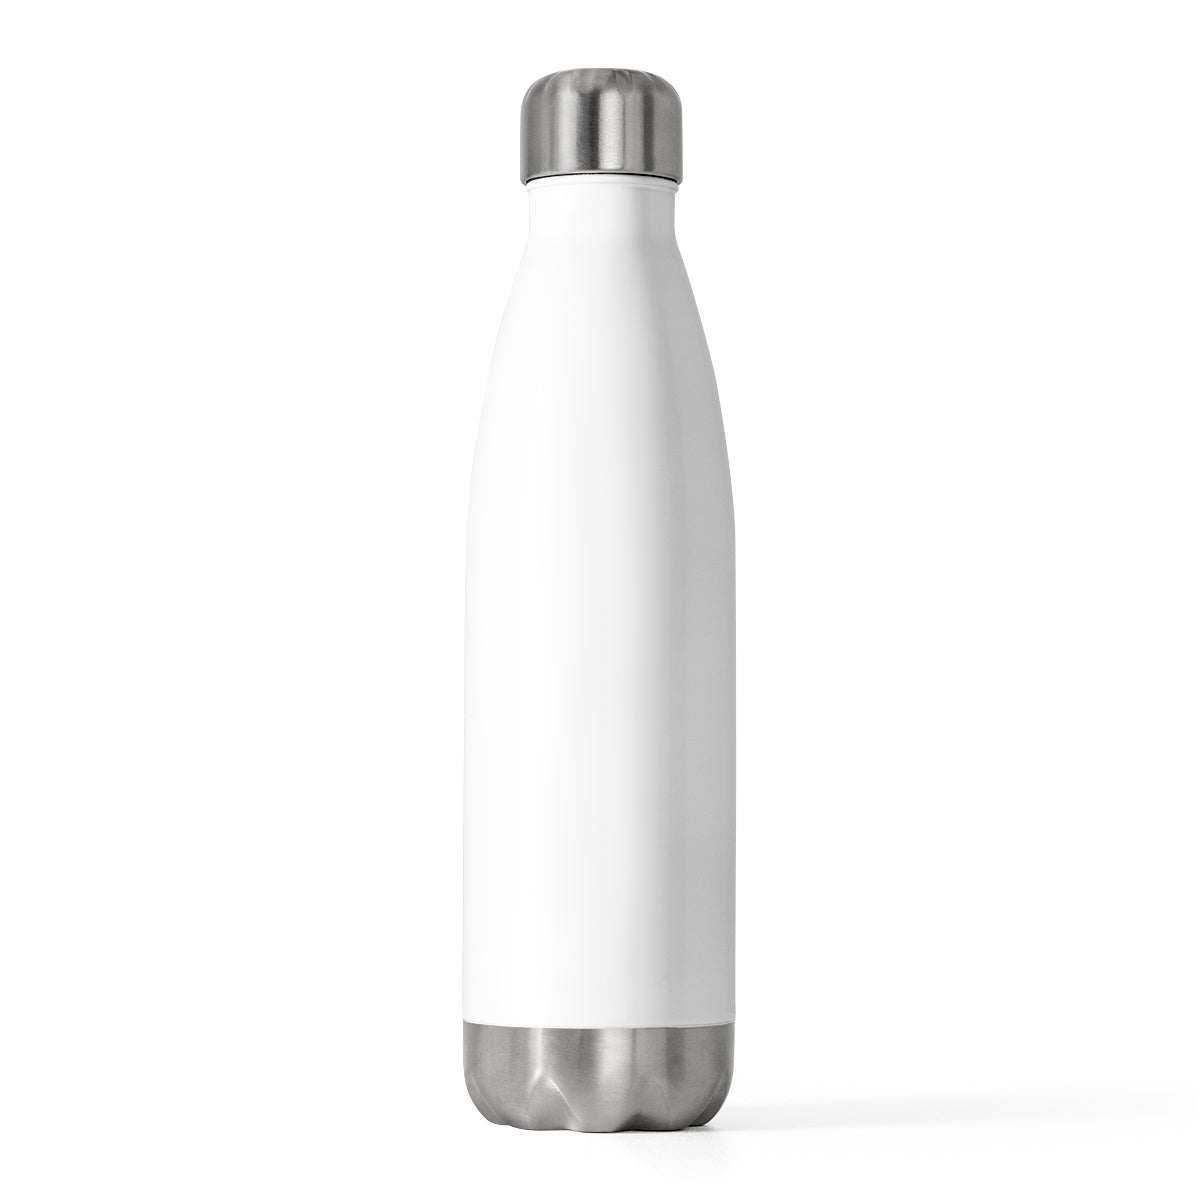 Blessings on Overflow Insulated Bottle Printify